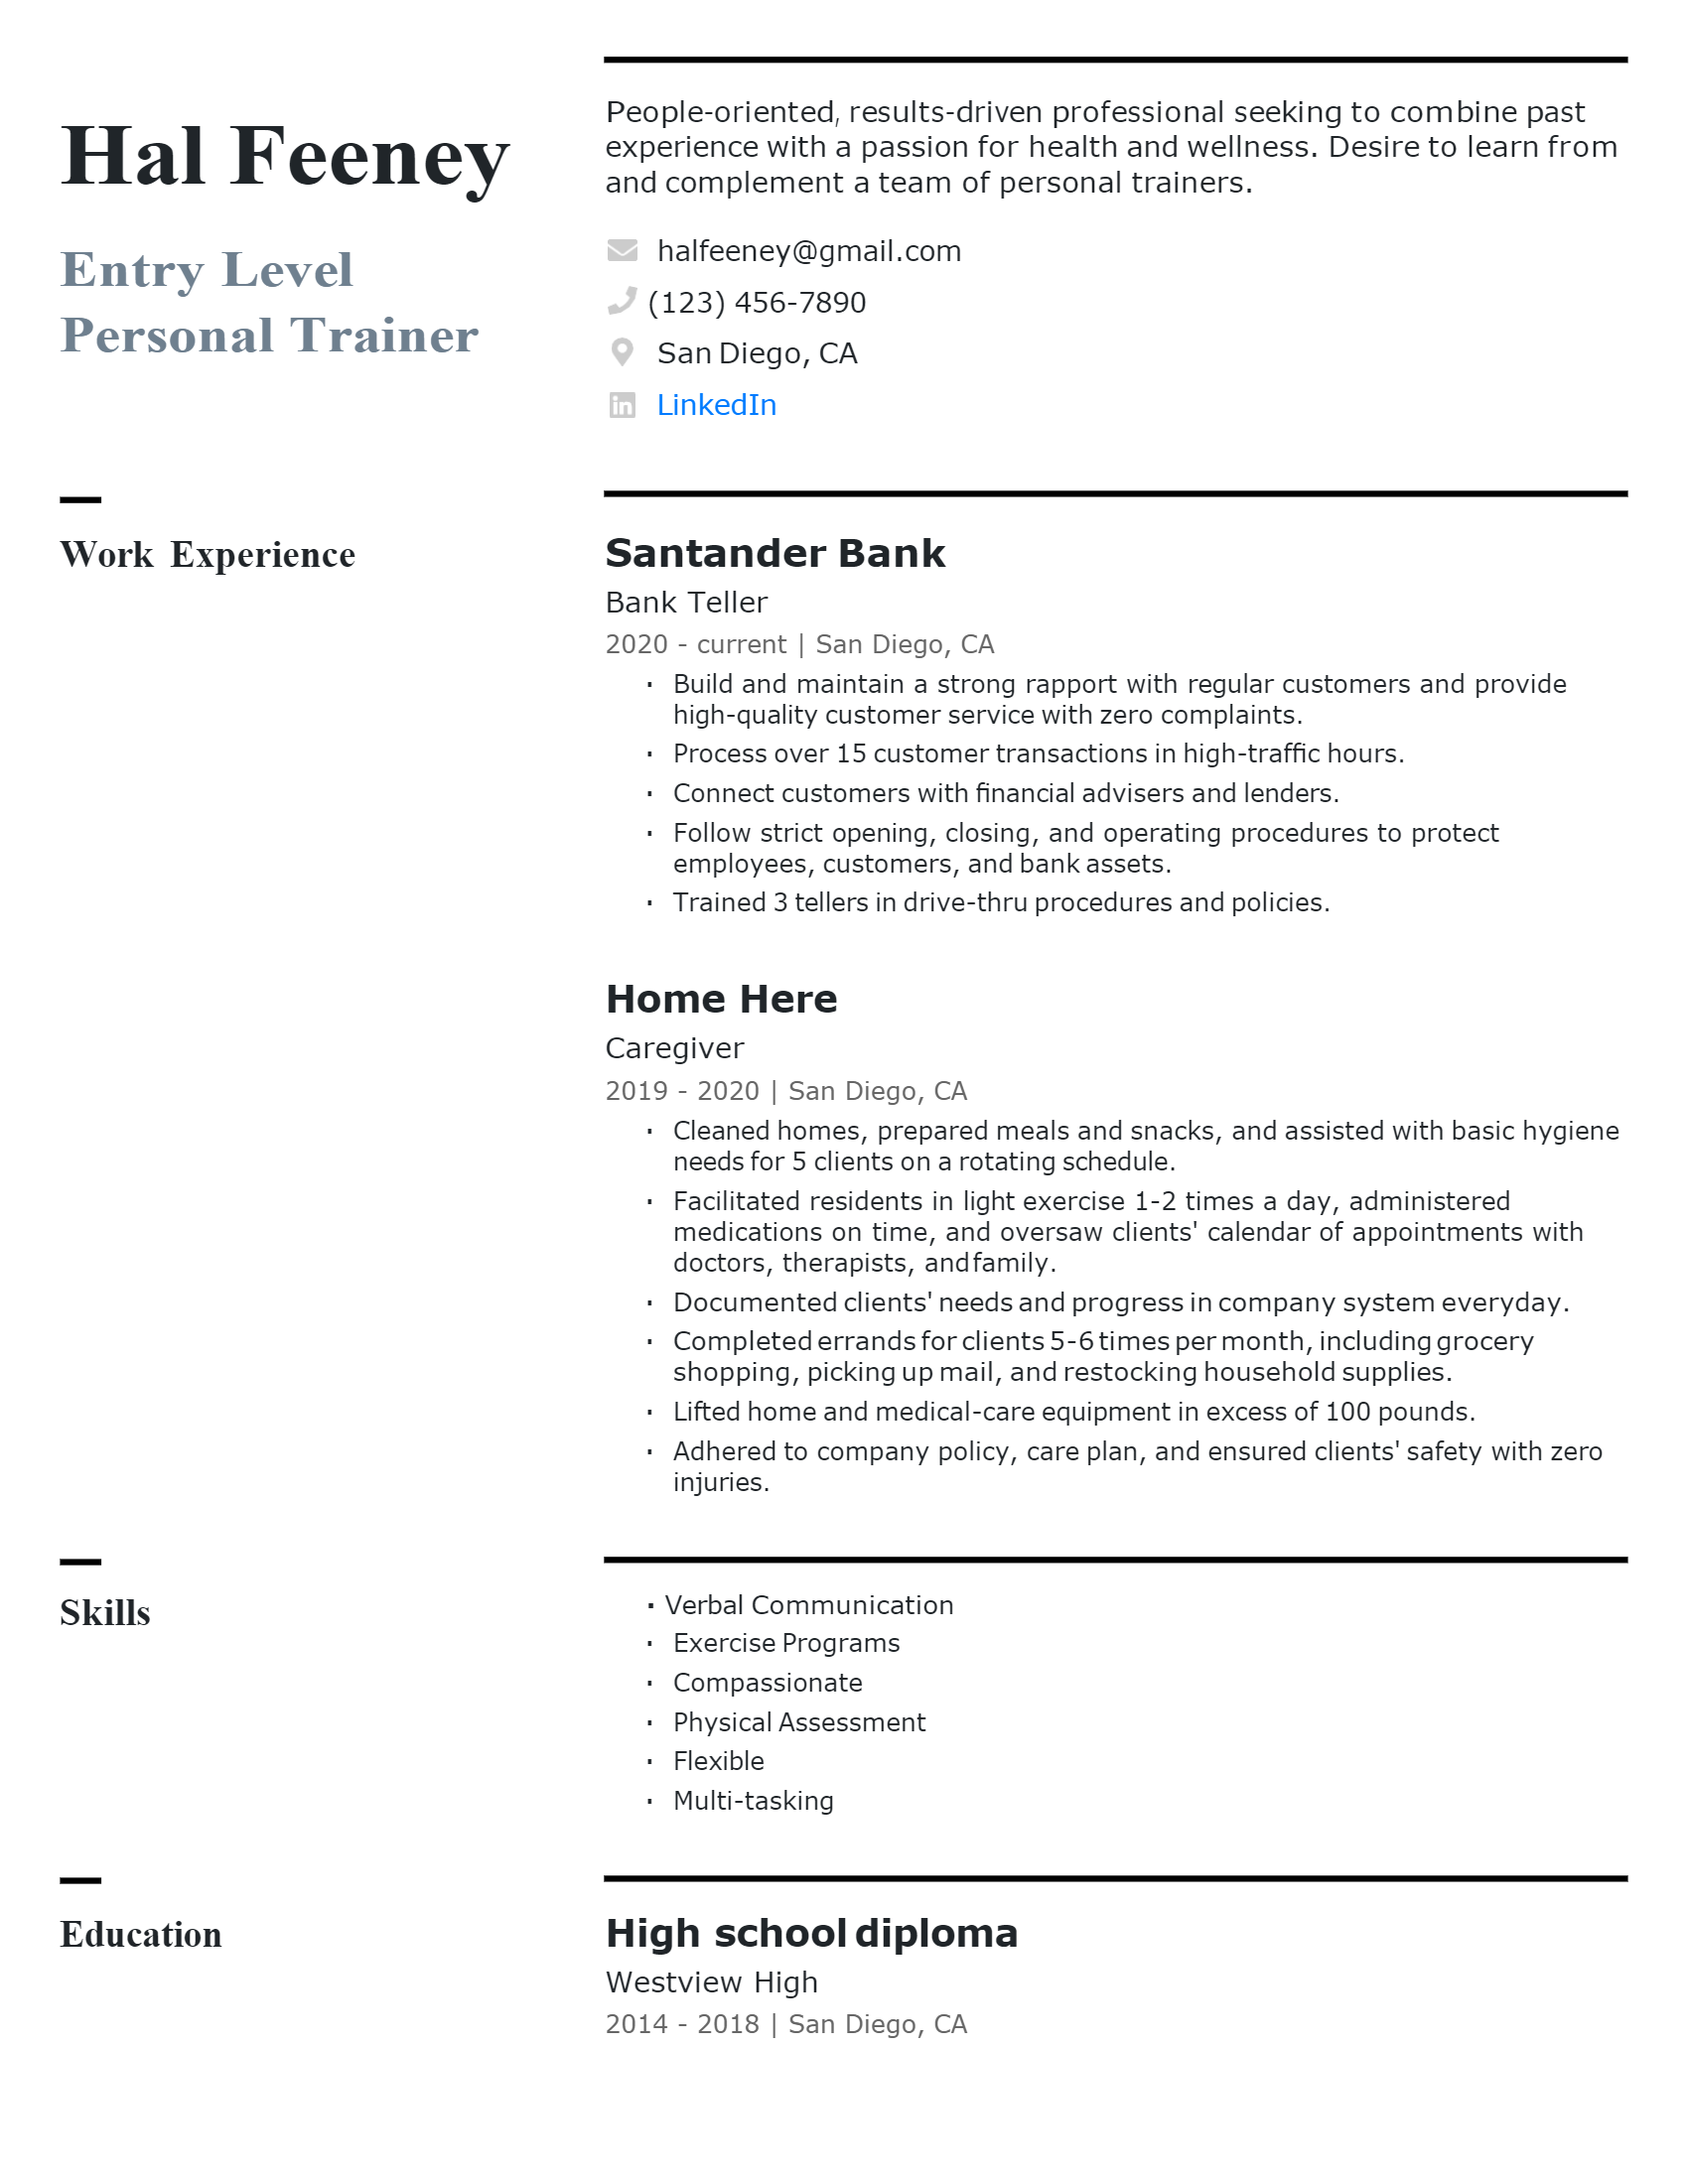 Entry-level Personal Trainer Resume .Docx (Word)